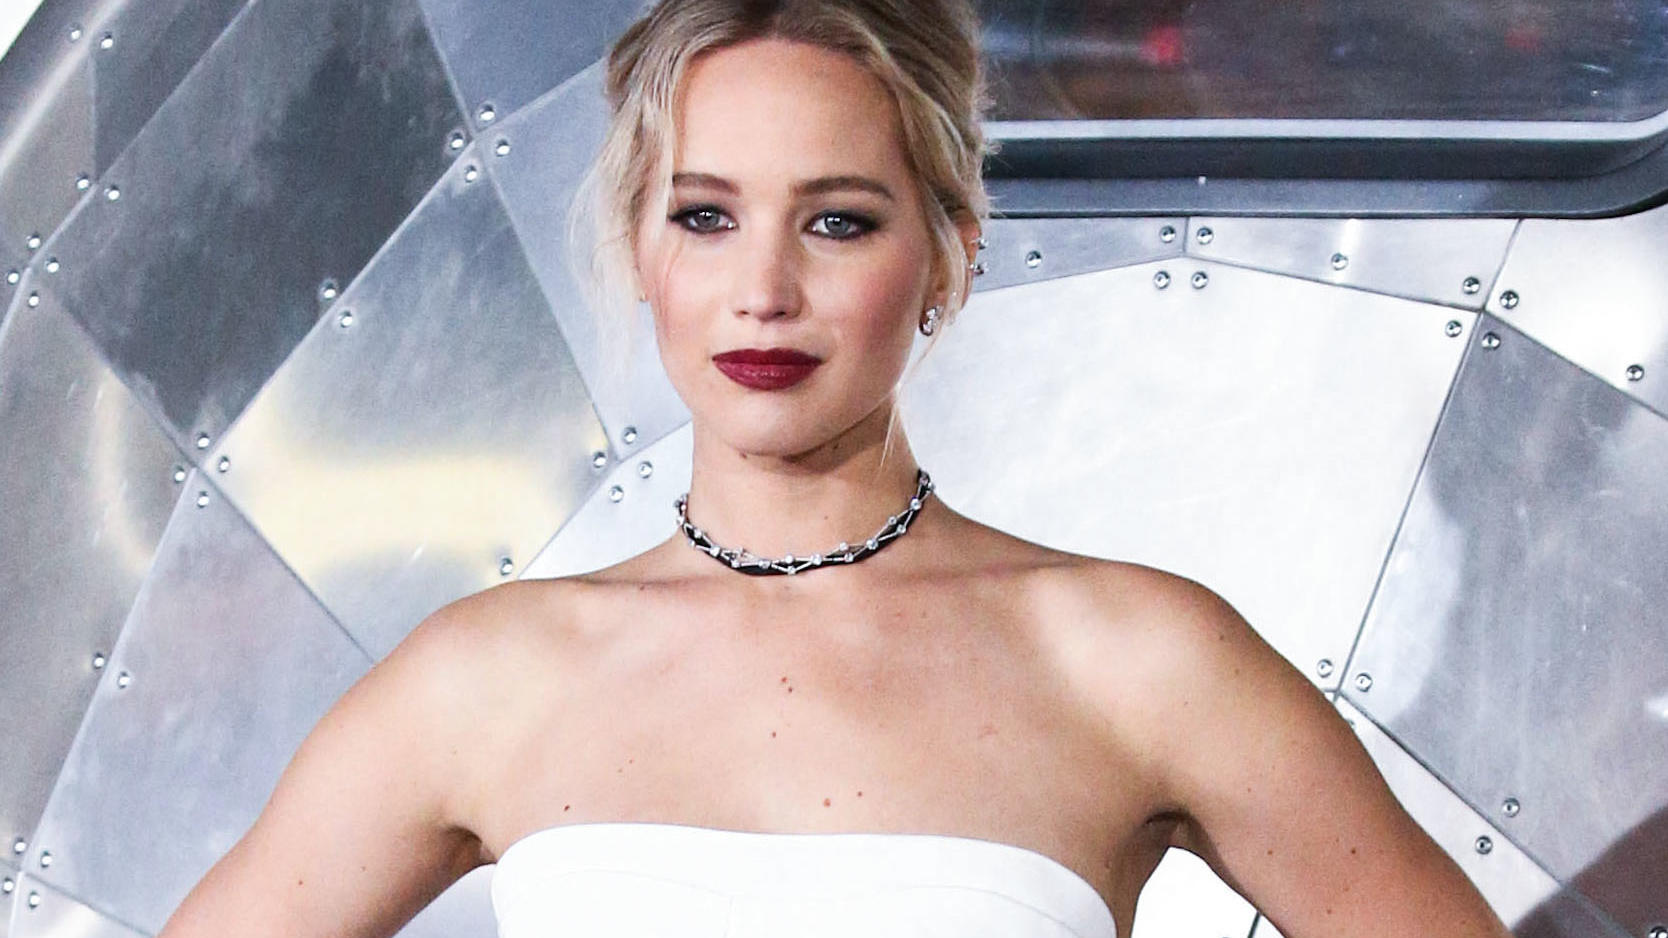 (FILE) Jennifer Lawrence marries Cooke Maroney. Jennifer Lawrence and Cooke Maroney tied the knot Saturday night at Belcourt of Newport, a pretty spectacular Rhode Island mansion. Among the guests were Ashley Olsen, Kris Jenner, Emma Stone, Corey Gam